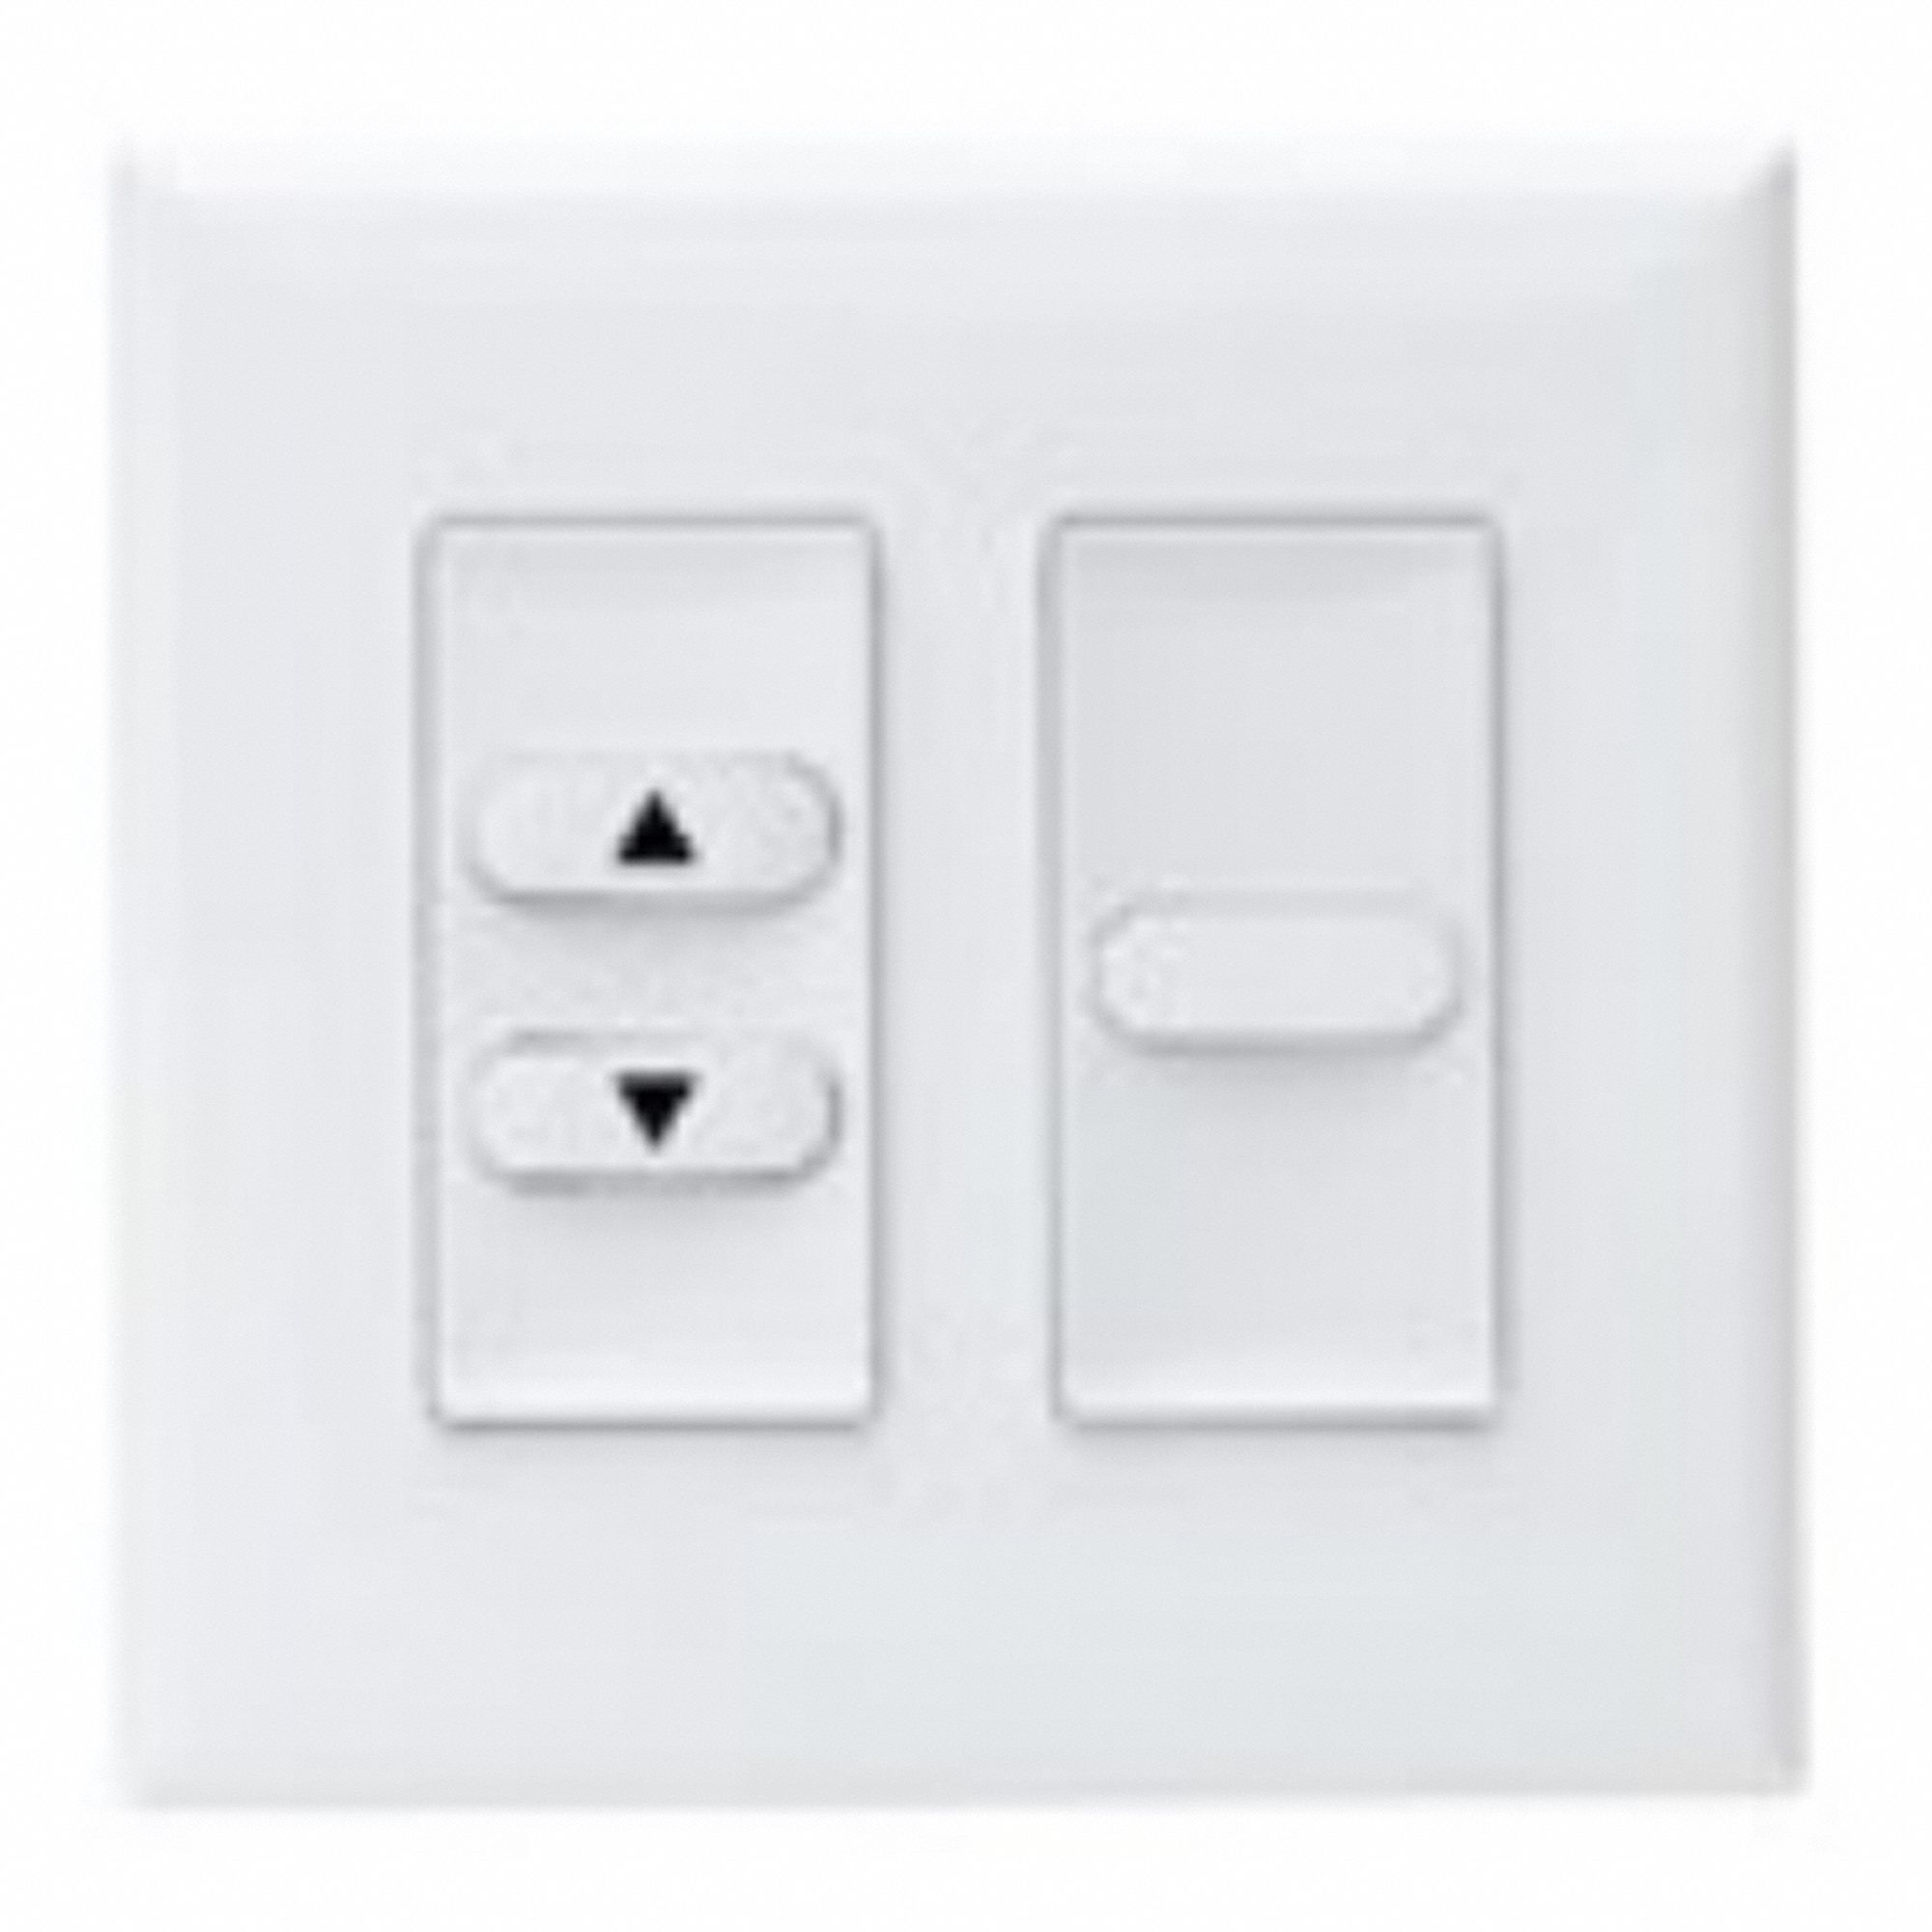 PROGRAMMABLE 2 BUTTON SWITCH, LOW VOLTAGE, ALMOND